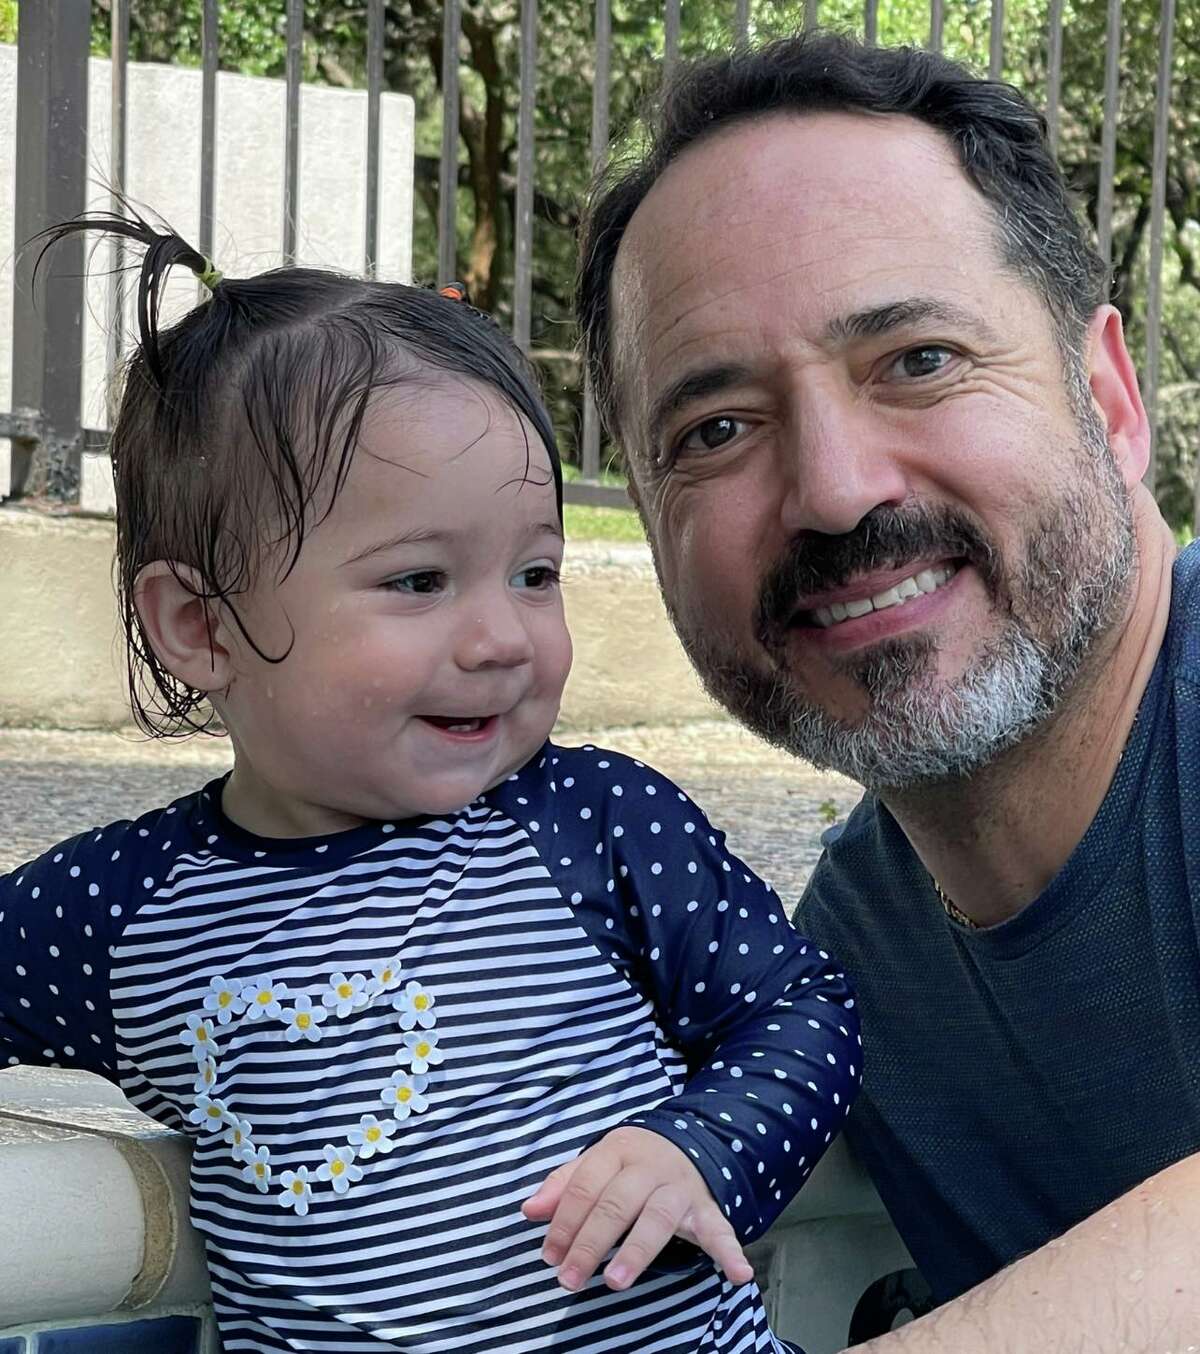 In social media posts, State Sen. José Menéndez shared that his granddaughter, Adelisa, tested positive for COVID-19 despite his entire family being vaccinated.